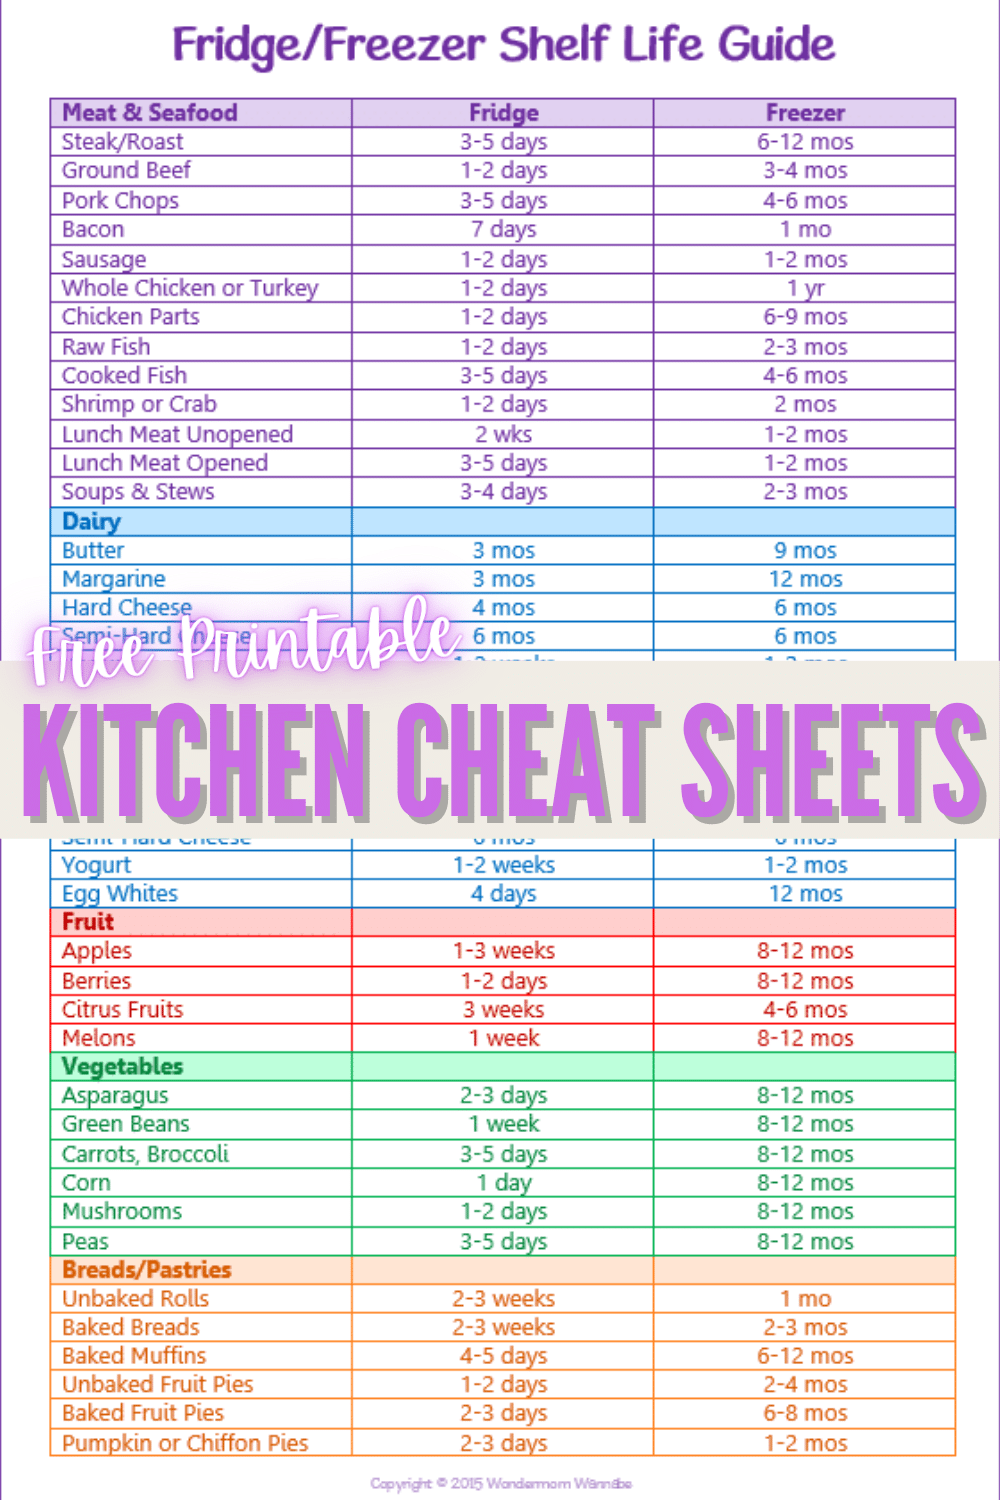 Use these free printable kitchen cheat sheets to easily find conversions and to make sure you discard food that's been around too long. #kitchen #cheatsheets #freeprintable #conversions via @wondermomwannab